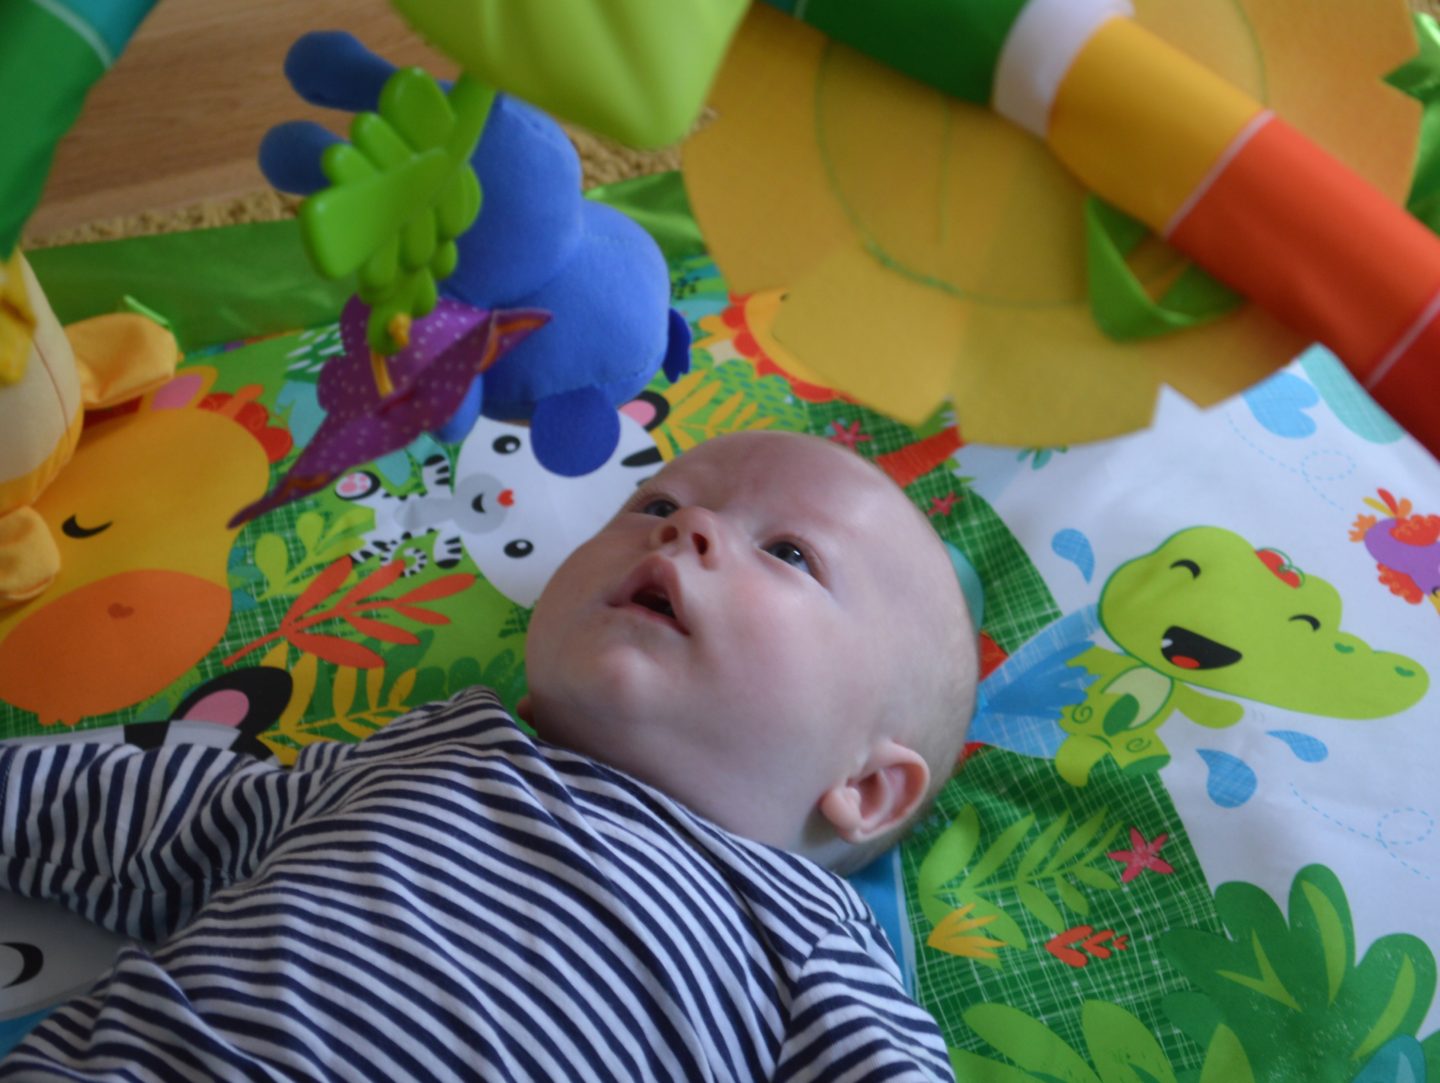 Fisher-Price Rainforest Deluxe Gym Review